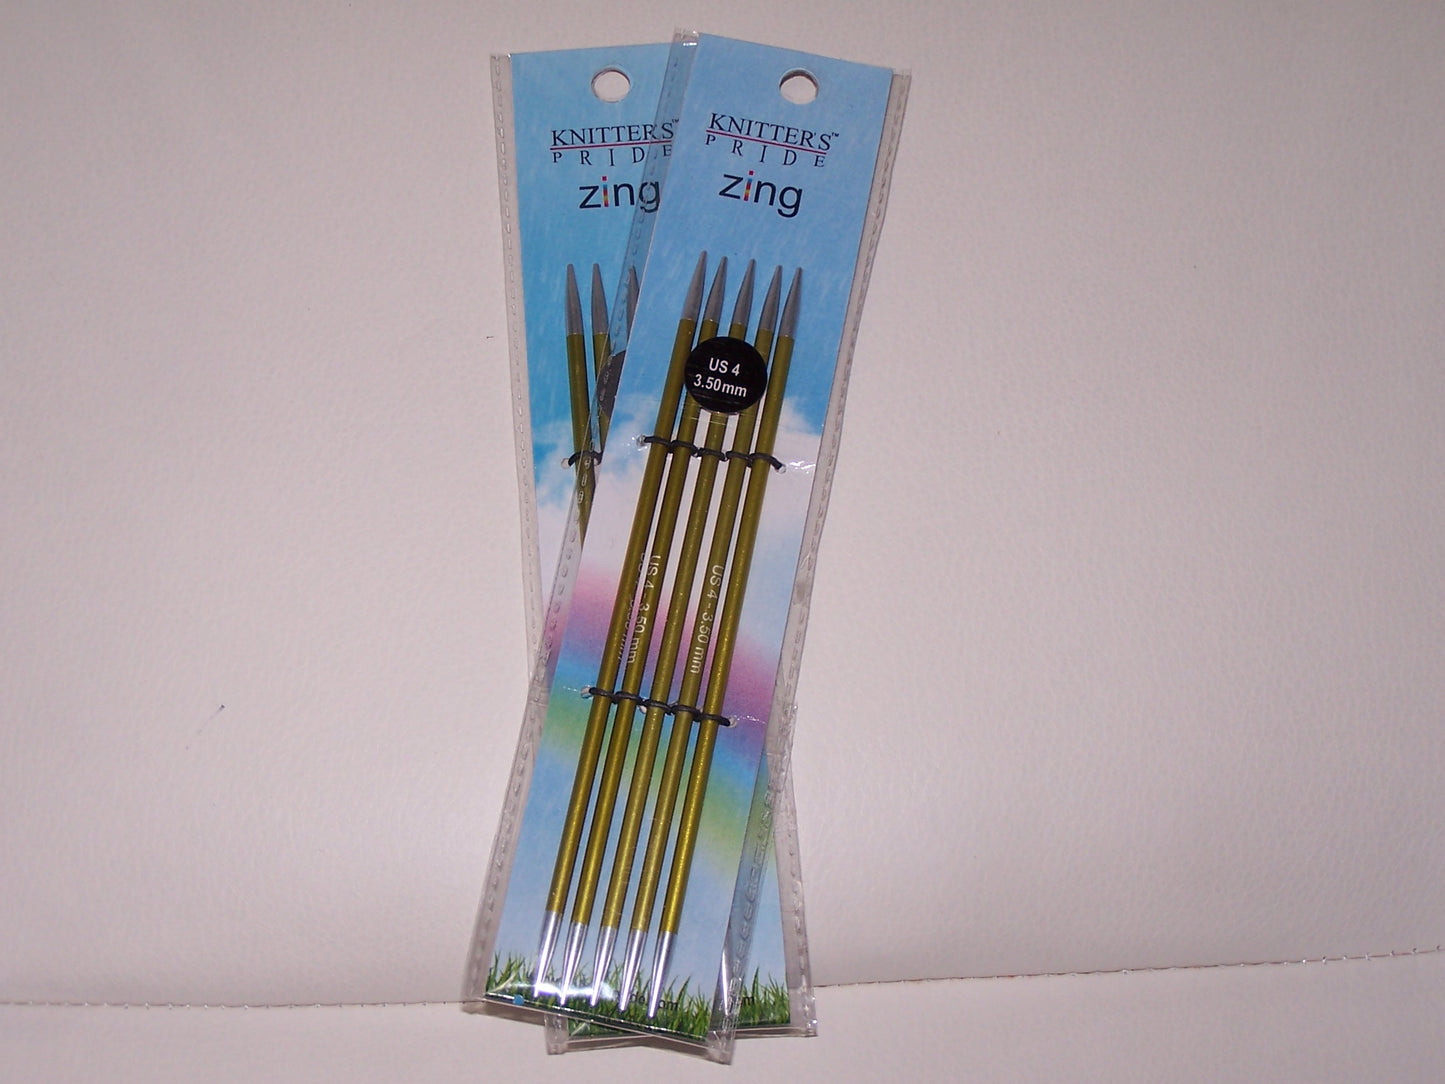 Knitters Pride Zing US 4 (3.50mm) size 6 inch DPN's